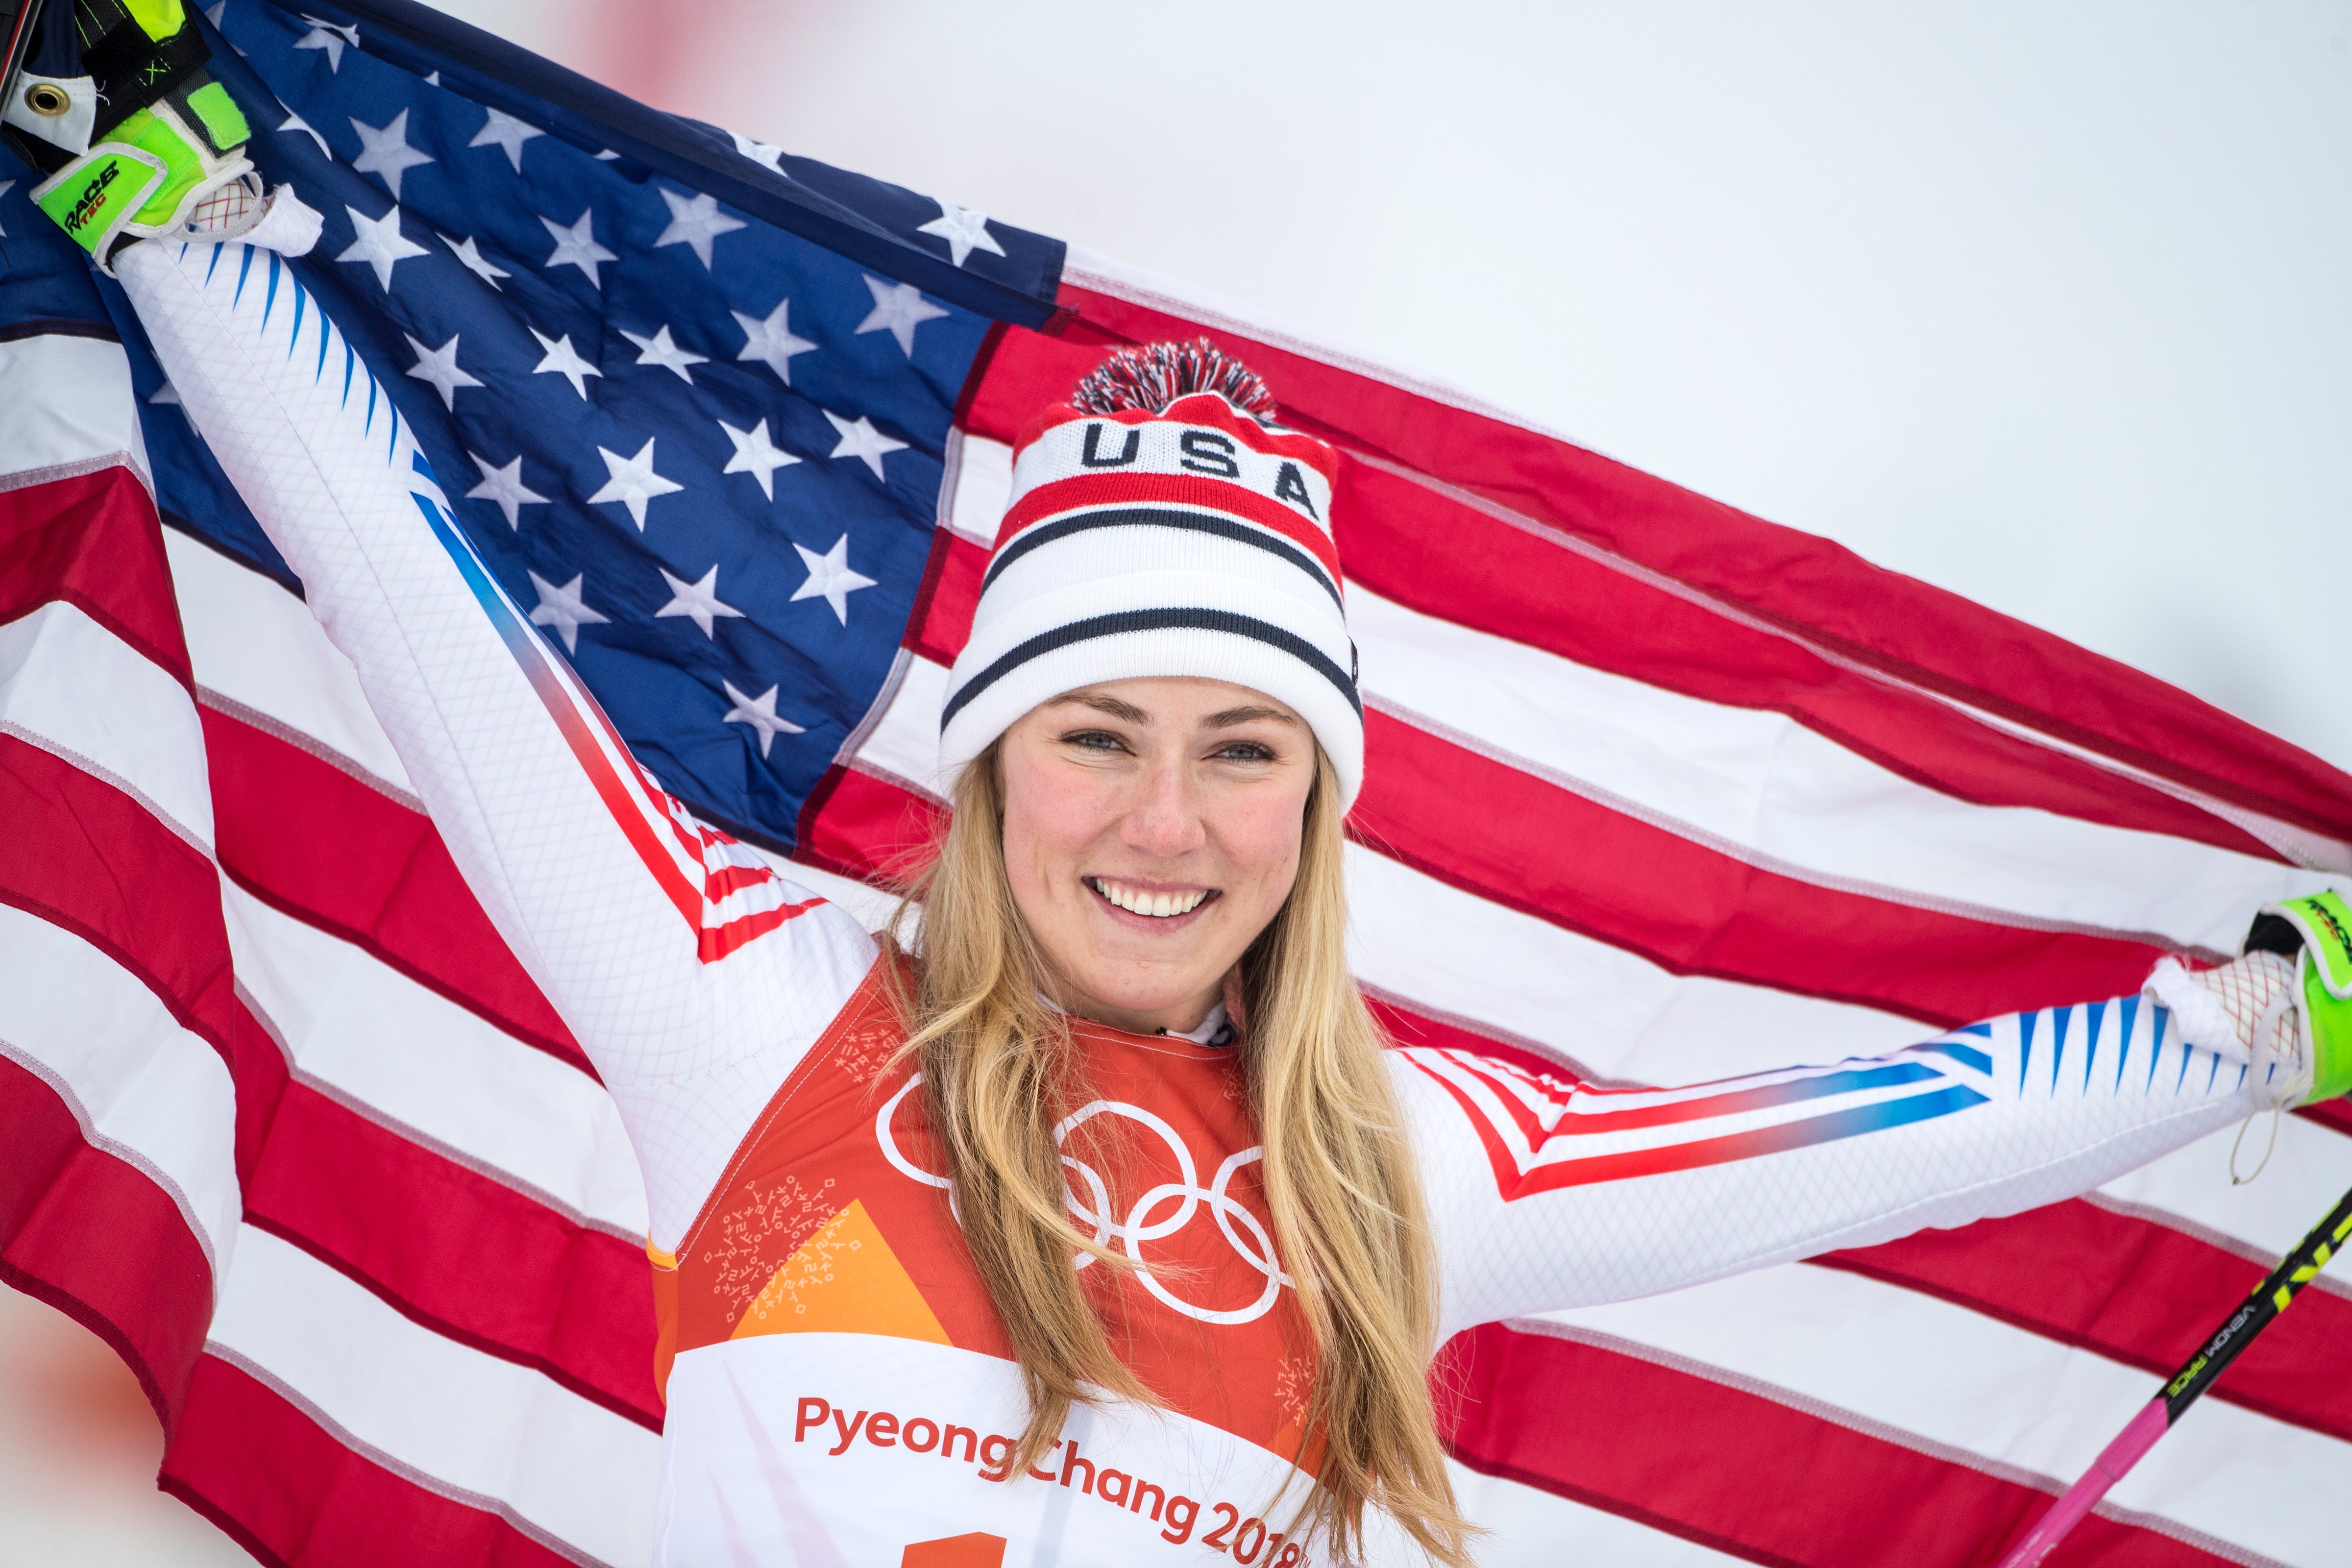 Silver medalist Mikaela Shiffrin #19 of the United States at the presentations after the Alpine Skiing - Ladies' Alpine Combined Slalom at Jeongseon Alpine Centre on February 22, 2018 in PyeongChang, South Korea. (Tim Clayton - Corbis—Corbis/Getty Images)